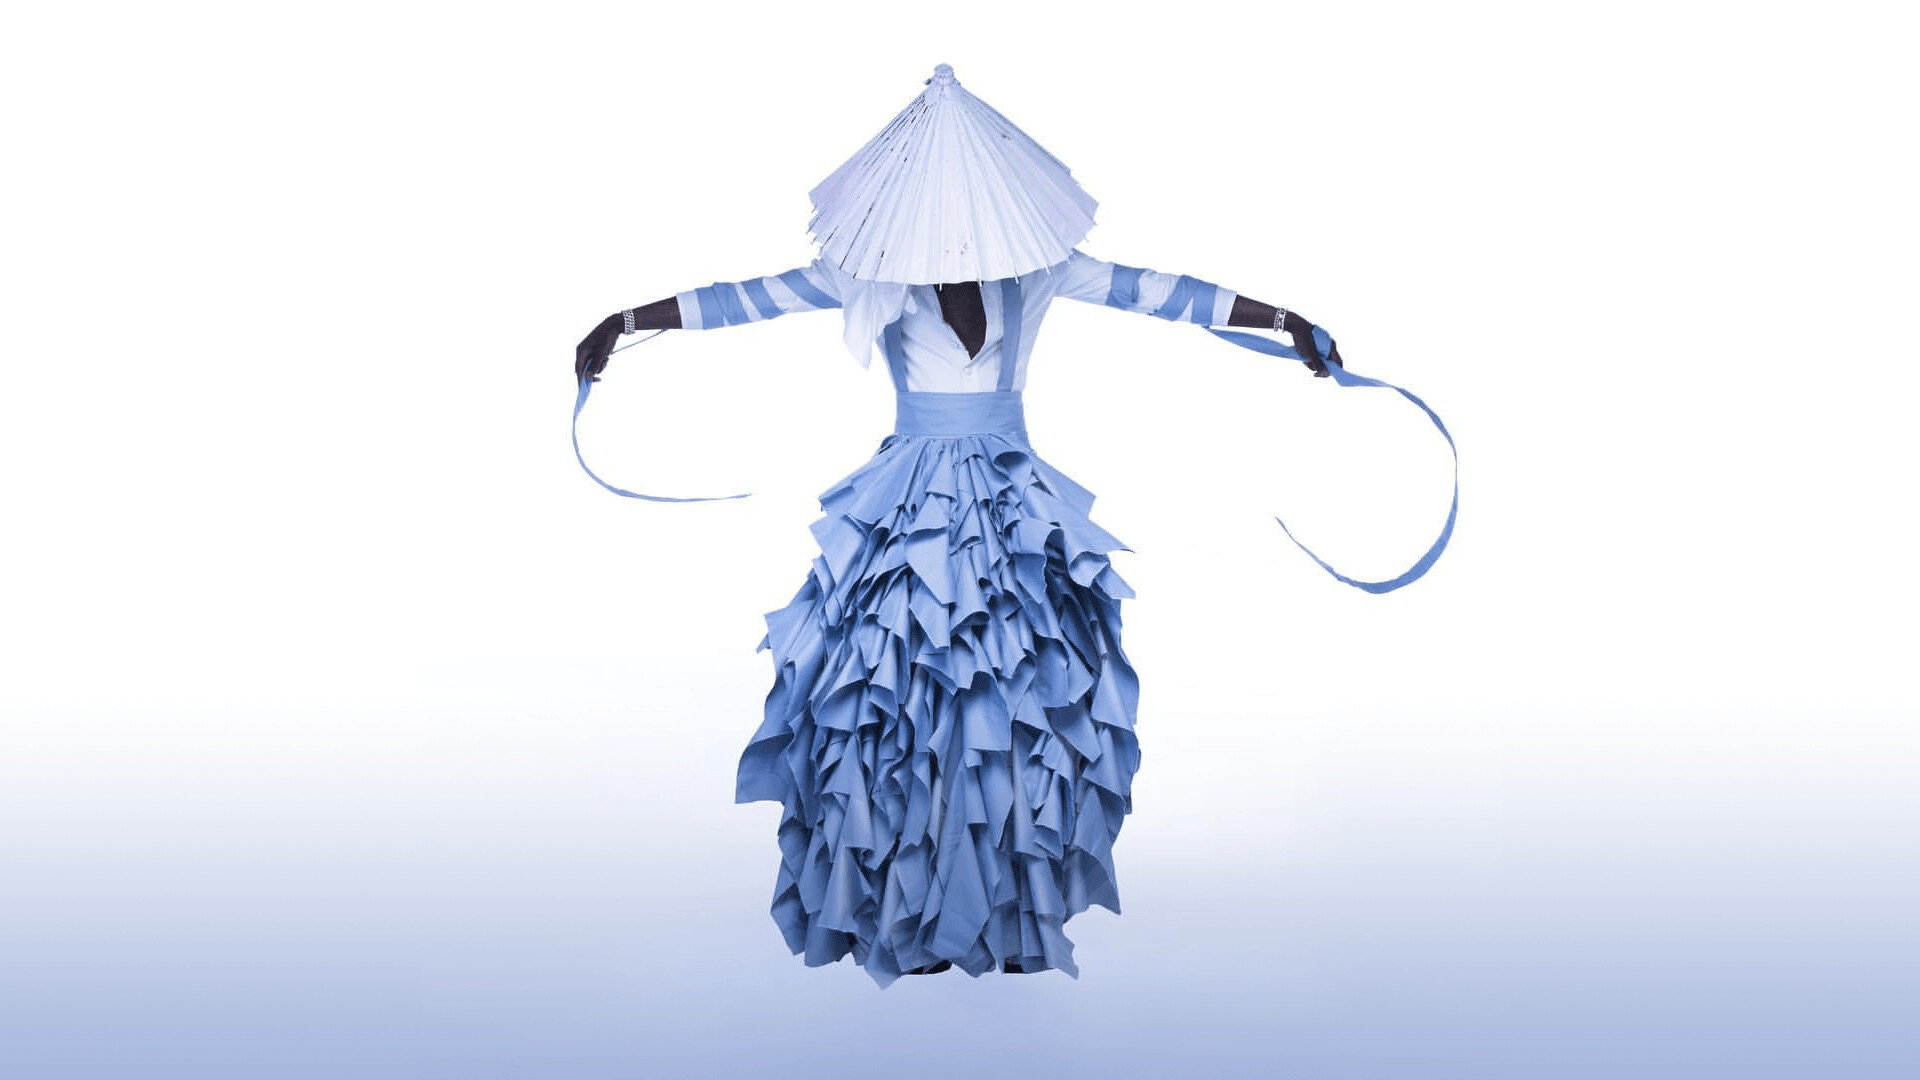 Young Thug: Thugger, Jeffery album, An androgynous dress designed by Italian designer Alessandro Trincone. 1920x1080 Full HD Background.